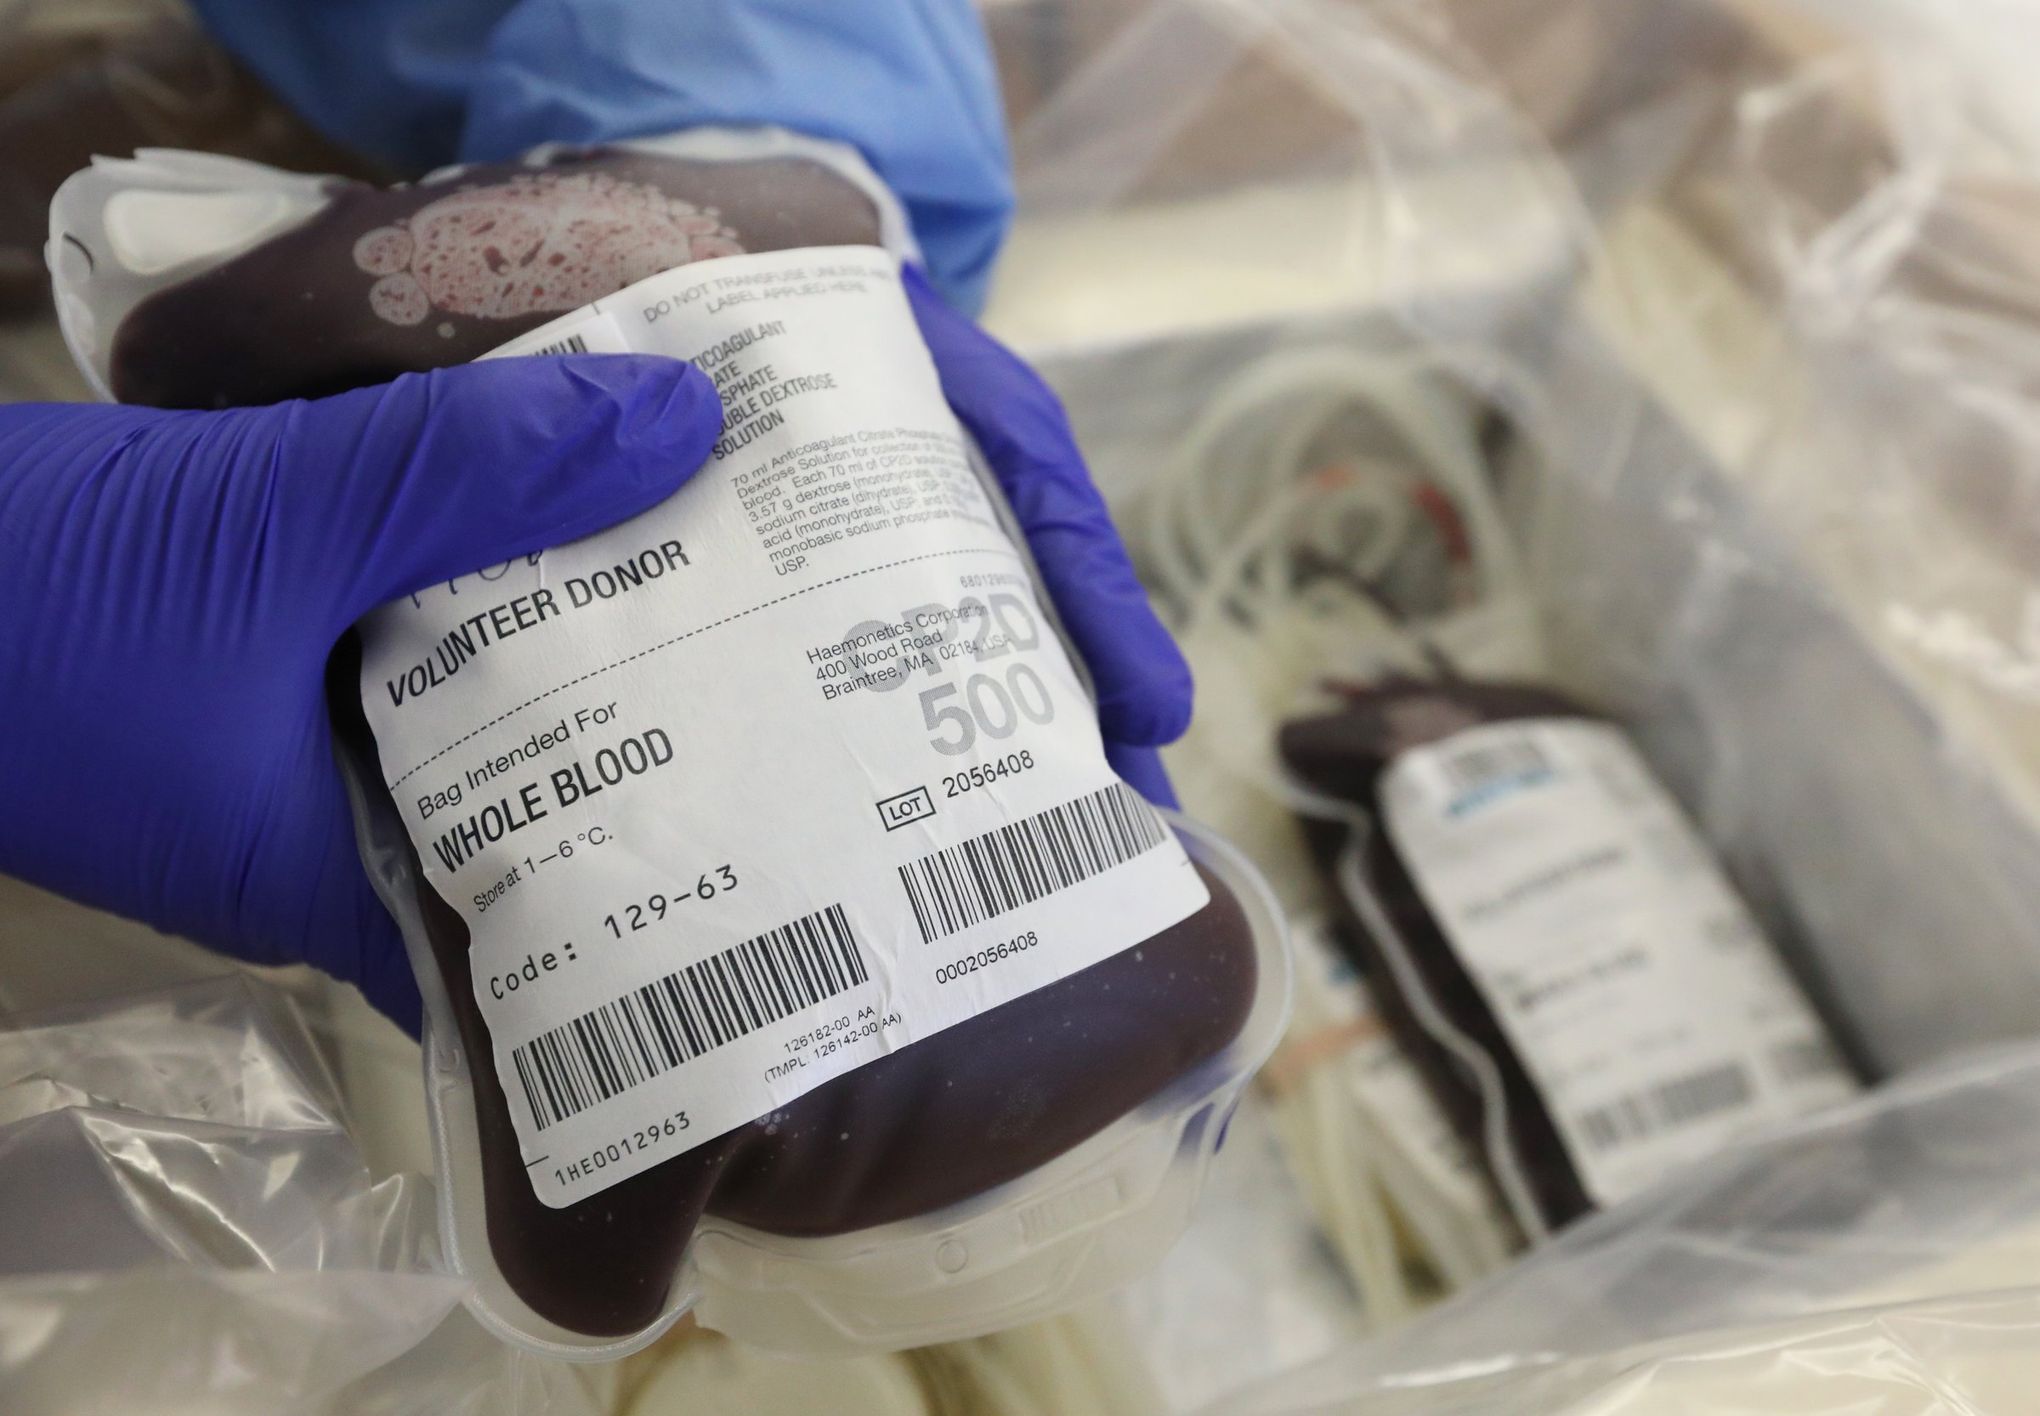 Donated blood prepared to be shipped at Bloodworks Northwest